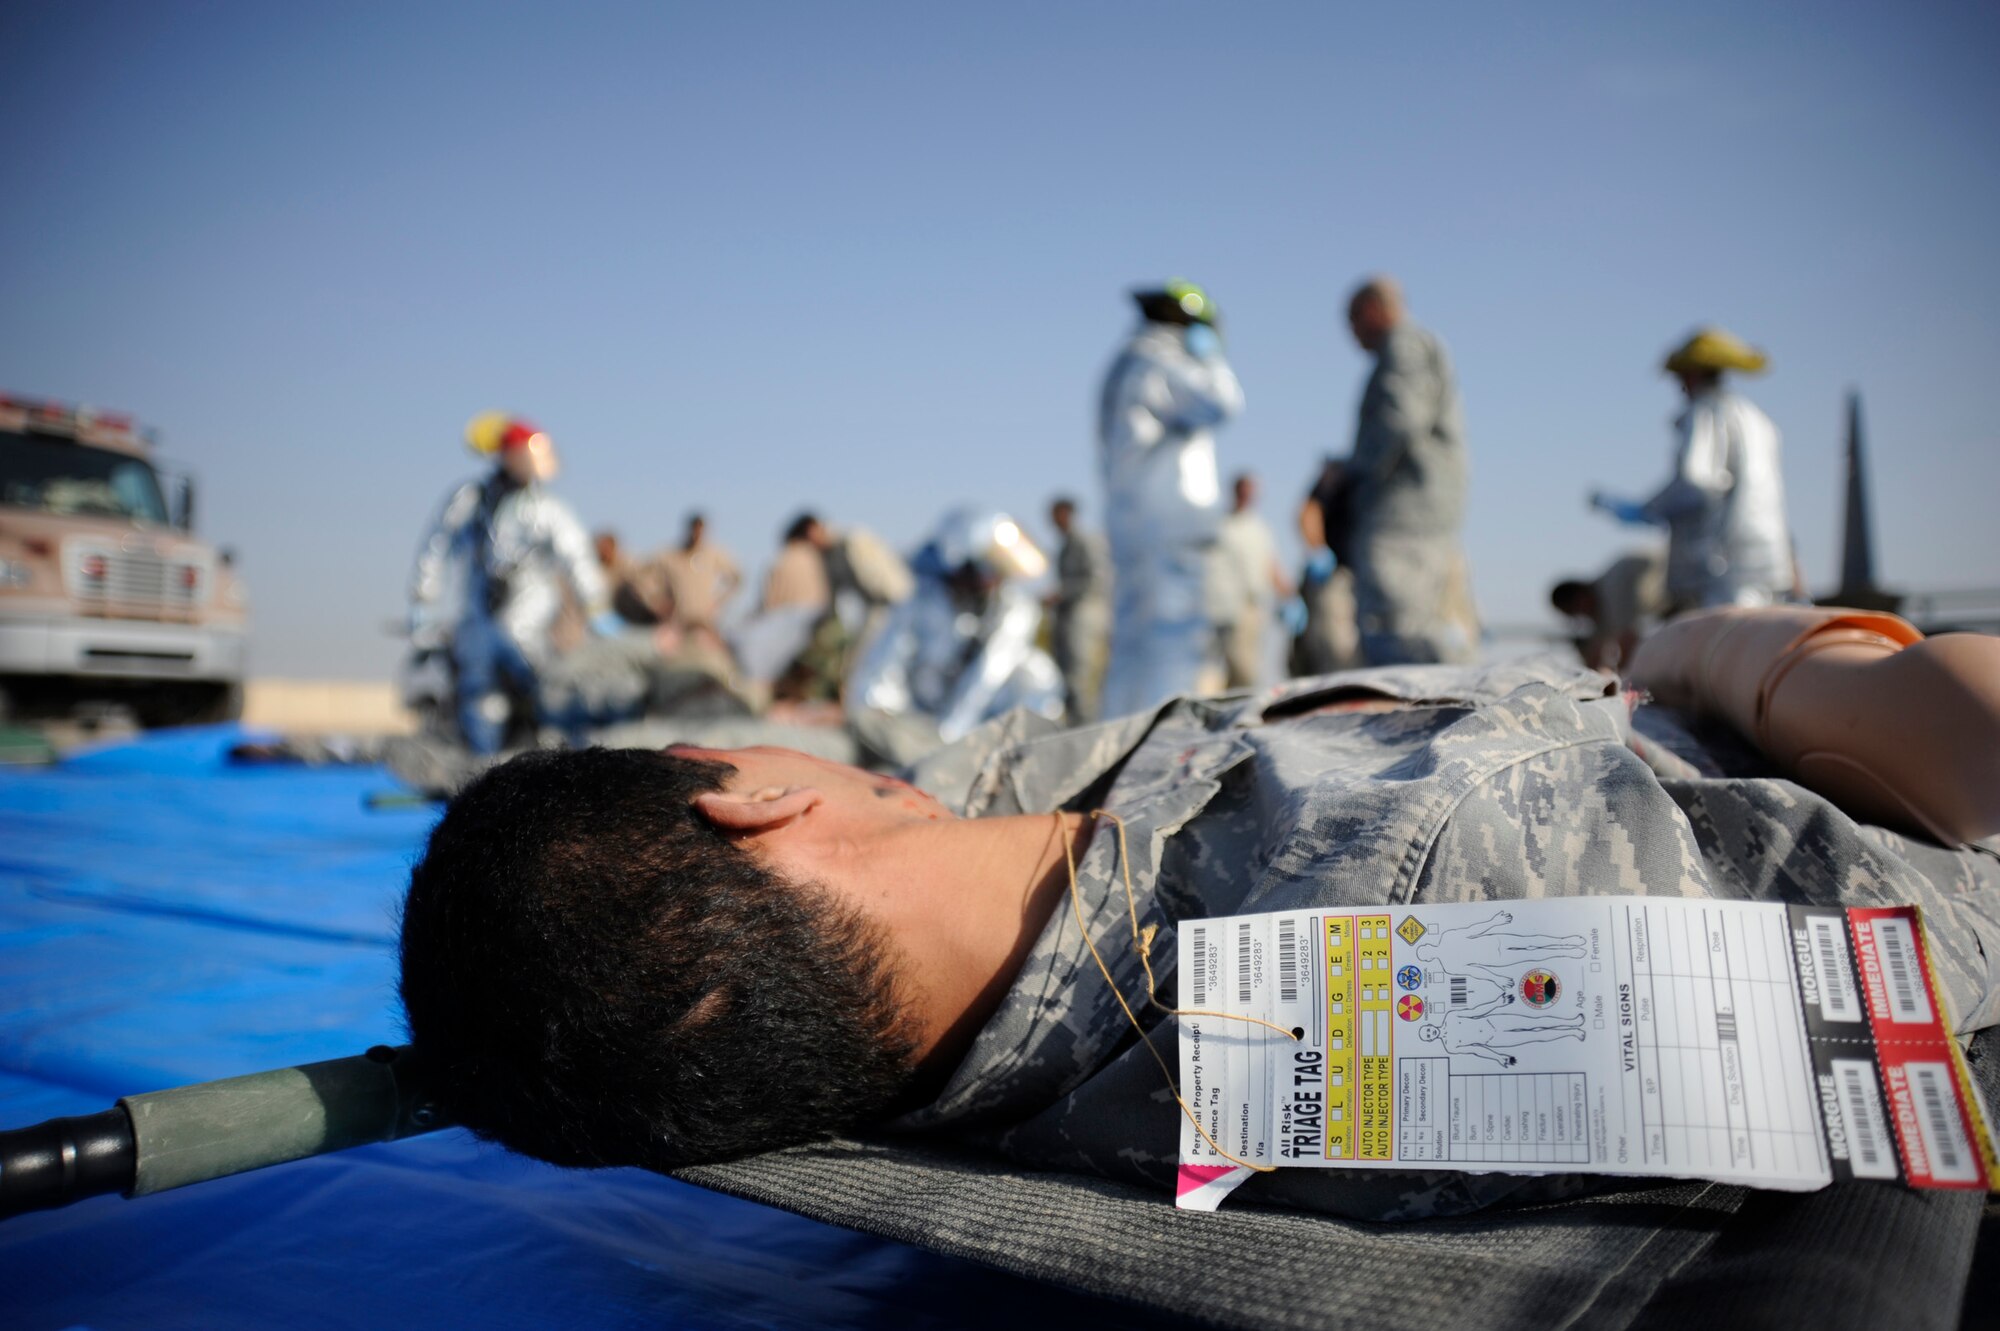 A mock immediate care casualty lays on a stretcher during a major accident response exercise at New Al-Muthana Air Base, Iraq on Nov. 21, 2008. Triage tags help designate the priority of casualties, document the vitals and track the individual until they can be transported to a medical facility. (U.S. Air Force photo/Staff Sgt. Paul Villanueva II)